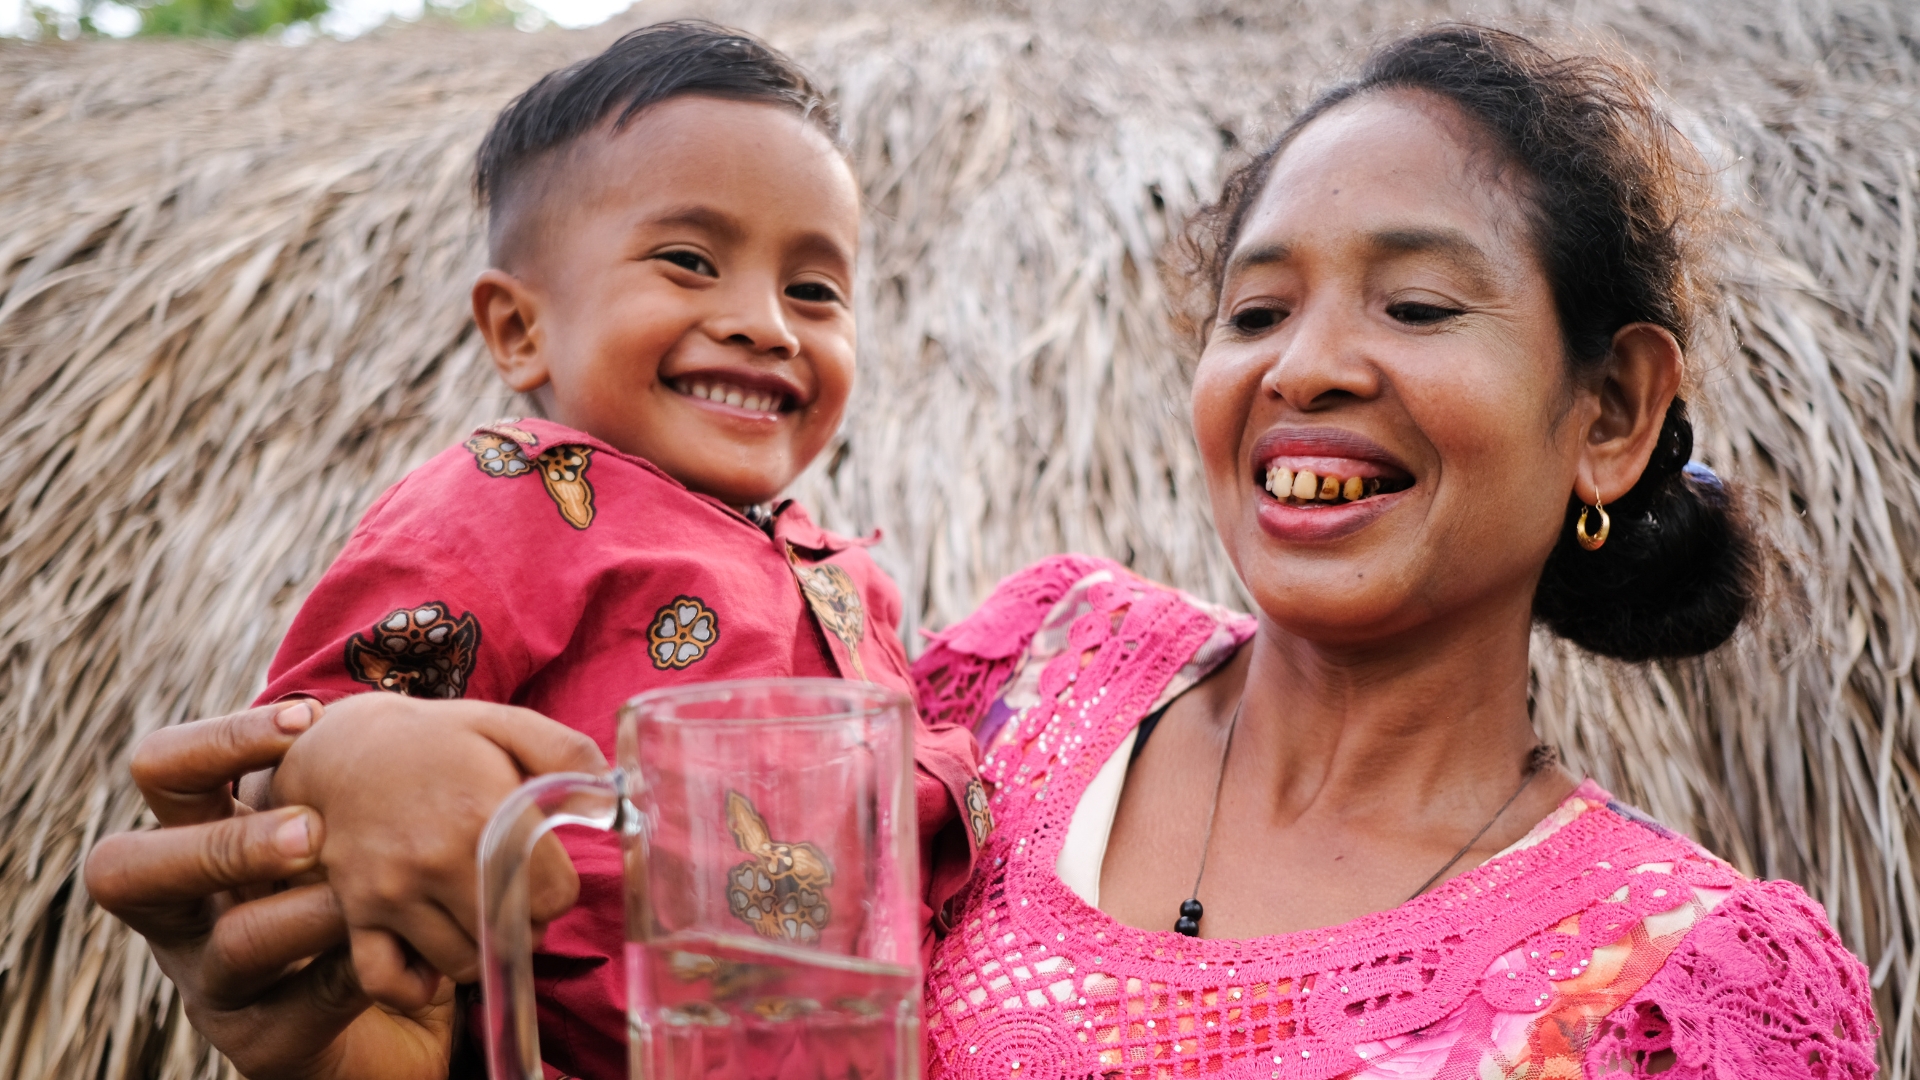 A woman and her child hold a glass of water and smile in front of their hut